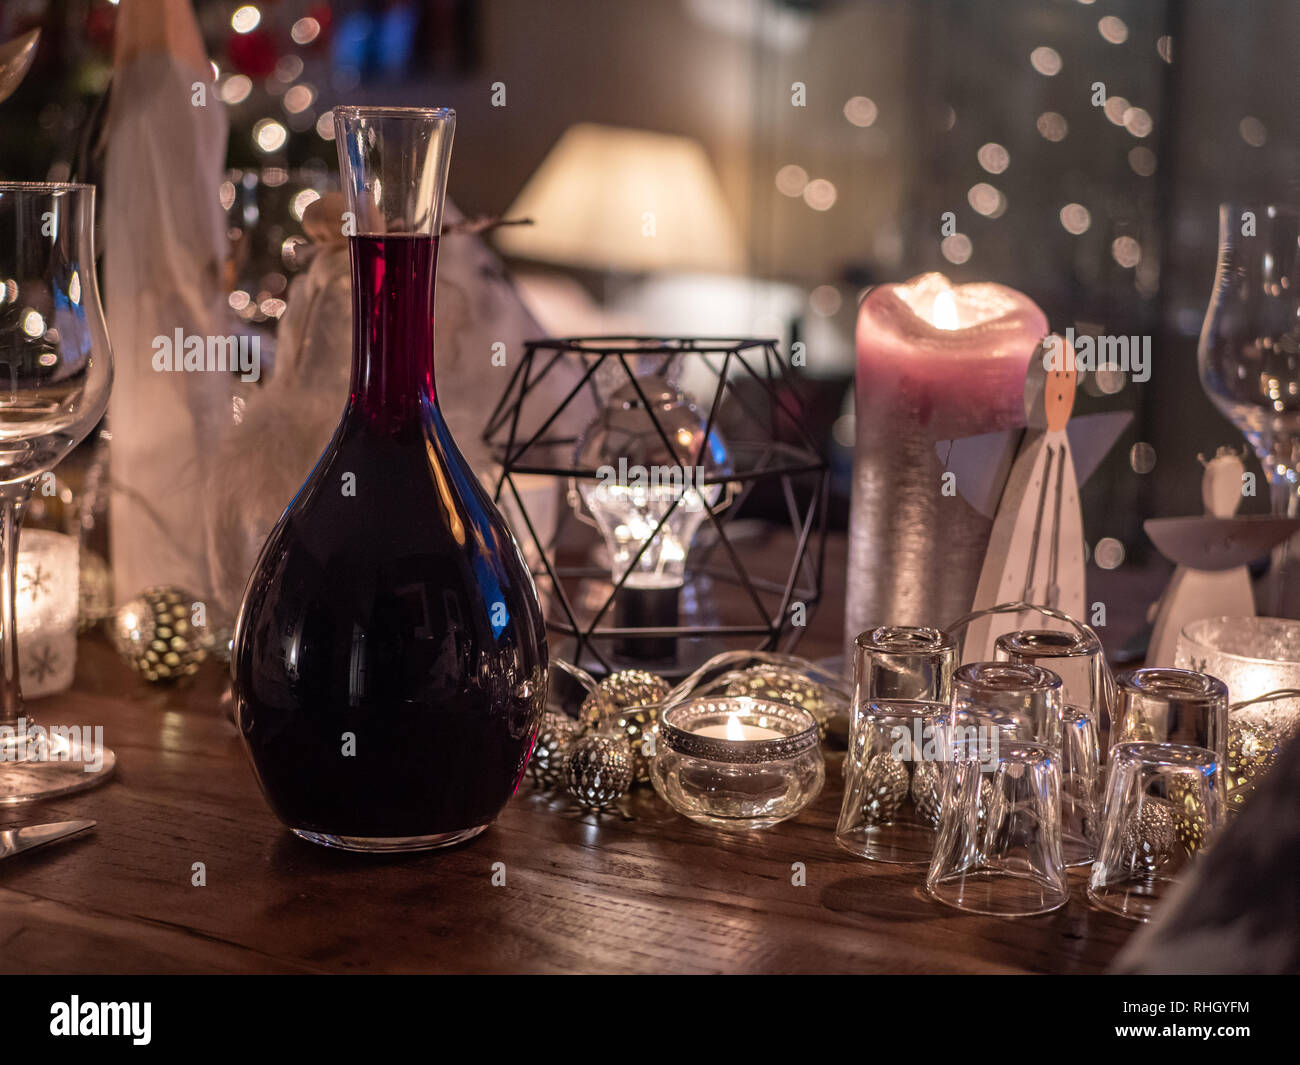 Detail of table decorated for Christmas with carafe of red wine. Shallow depth of field with wine and glasses in focus. Stock Photo